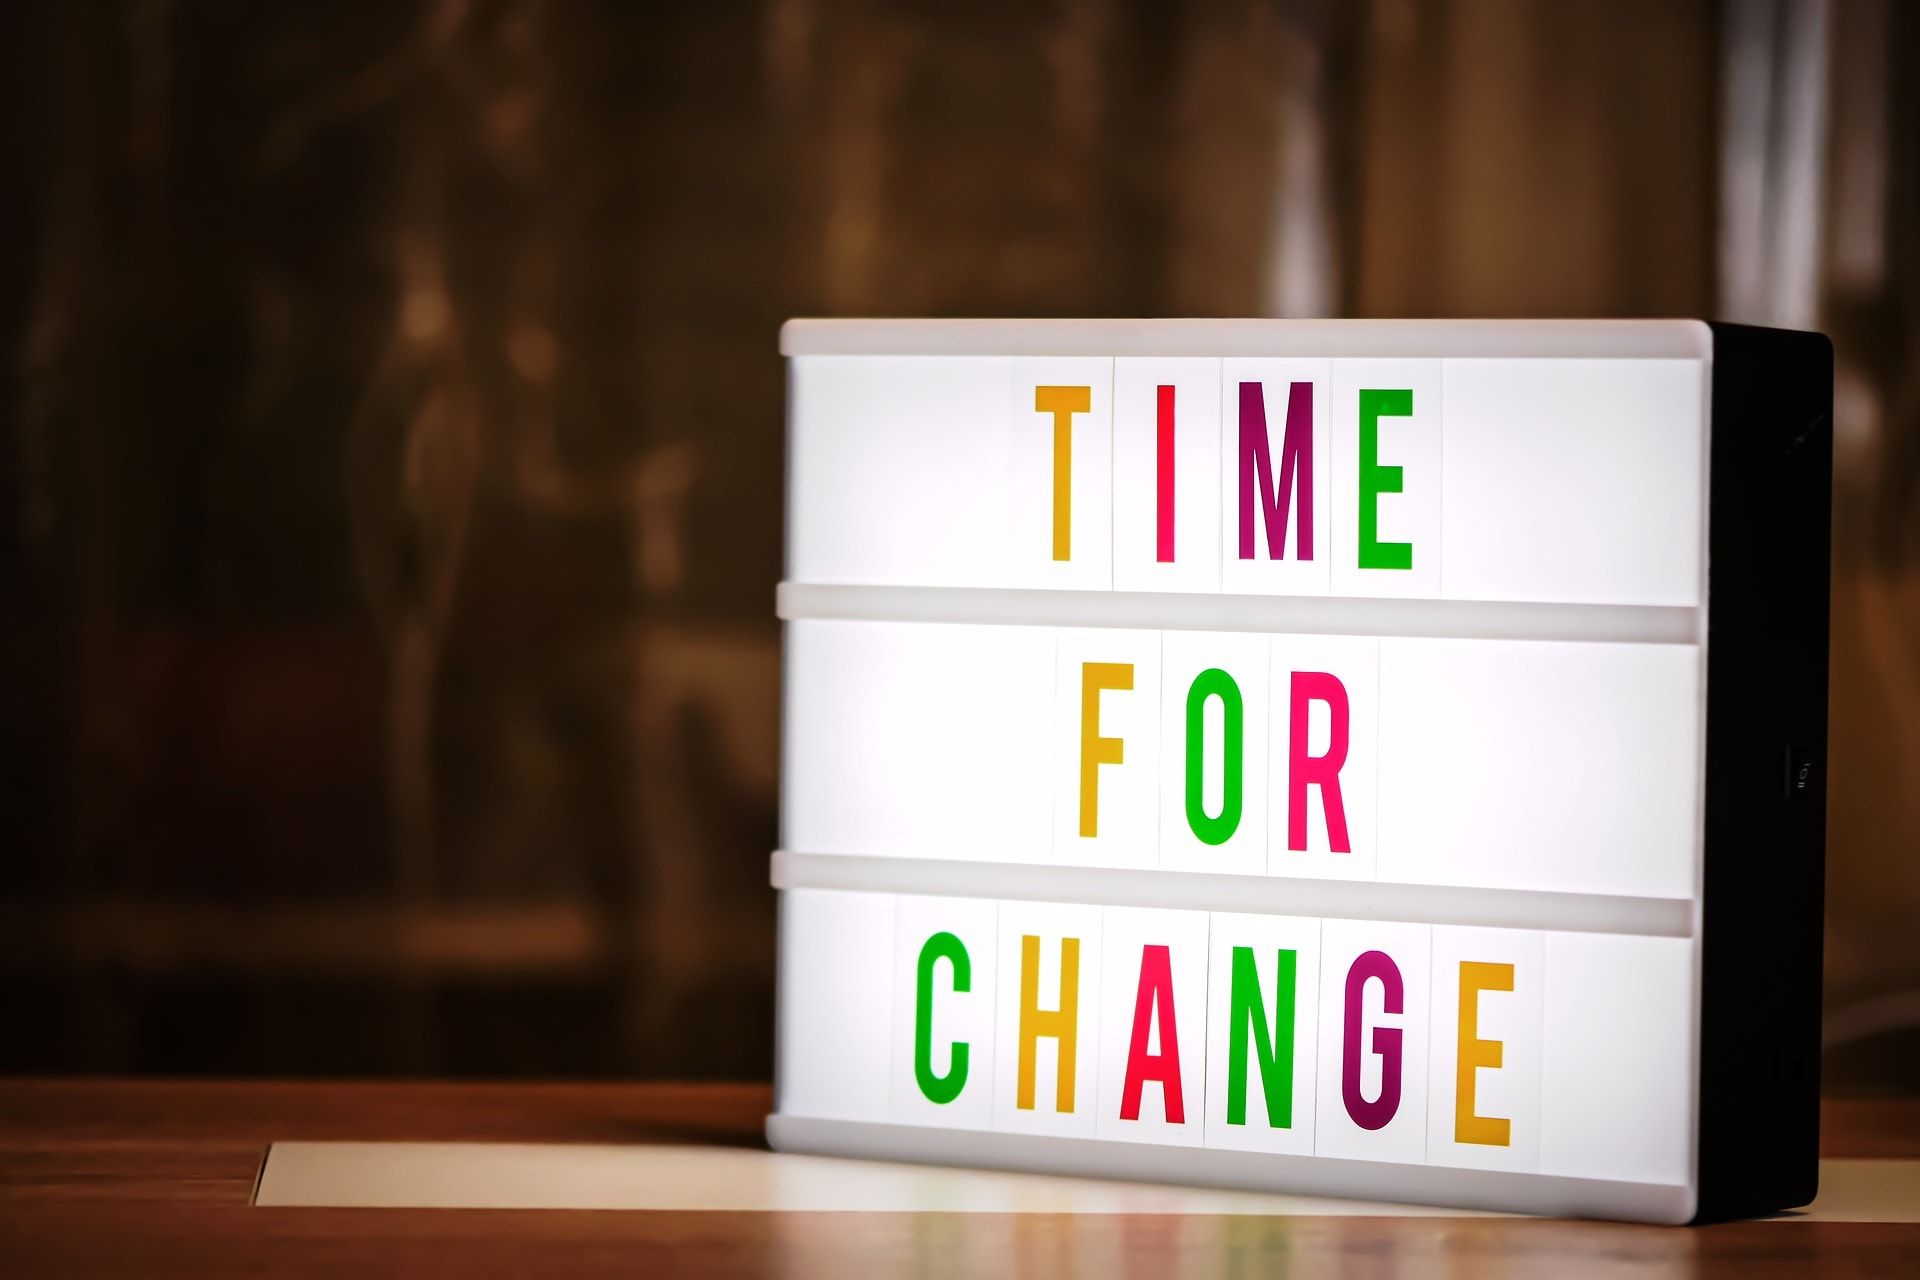 Photo showing a sign saying "Time for change"